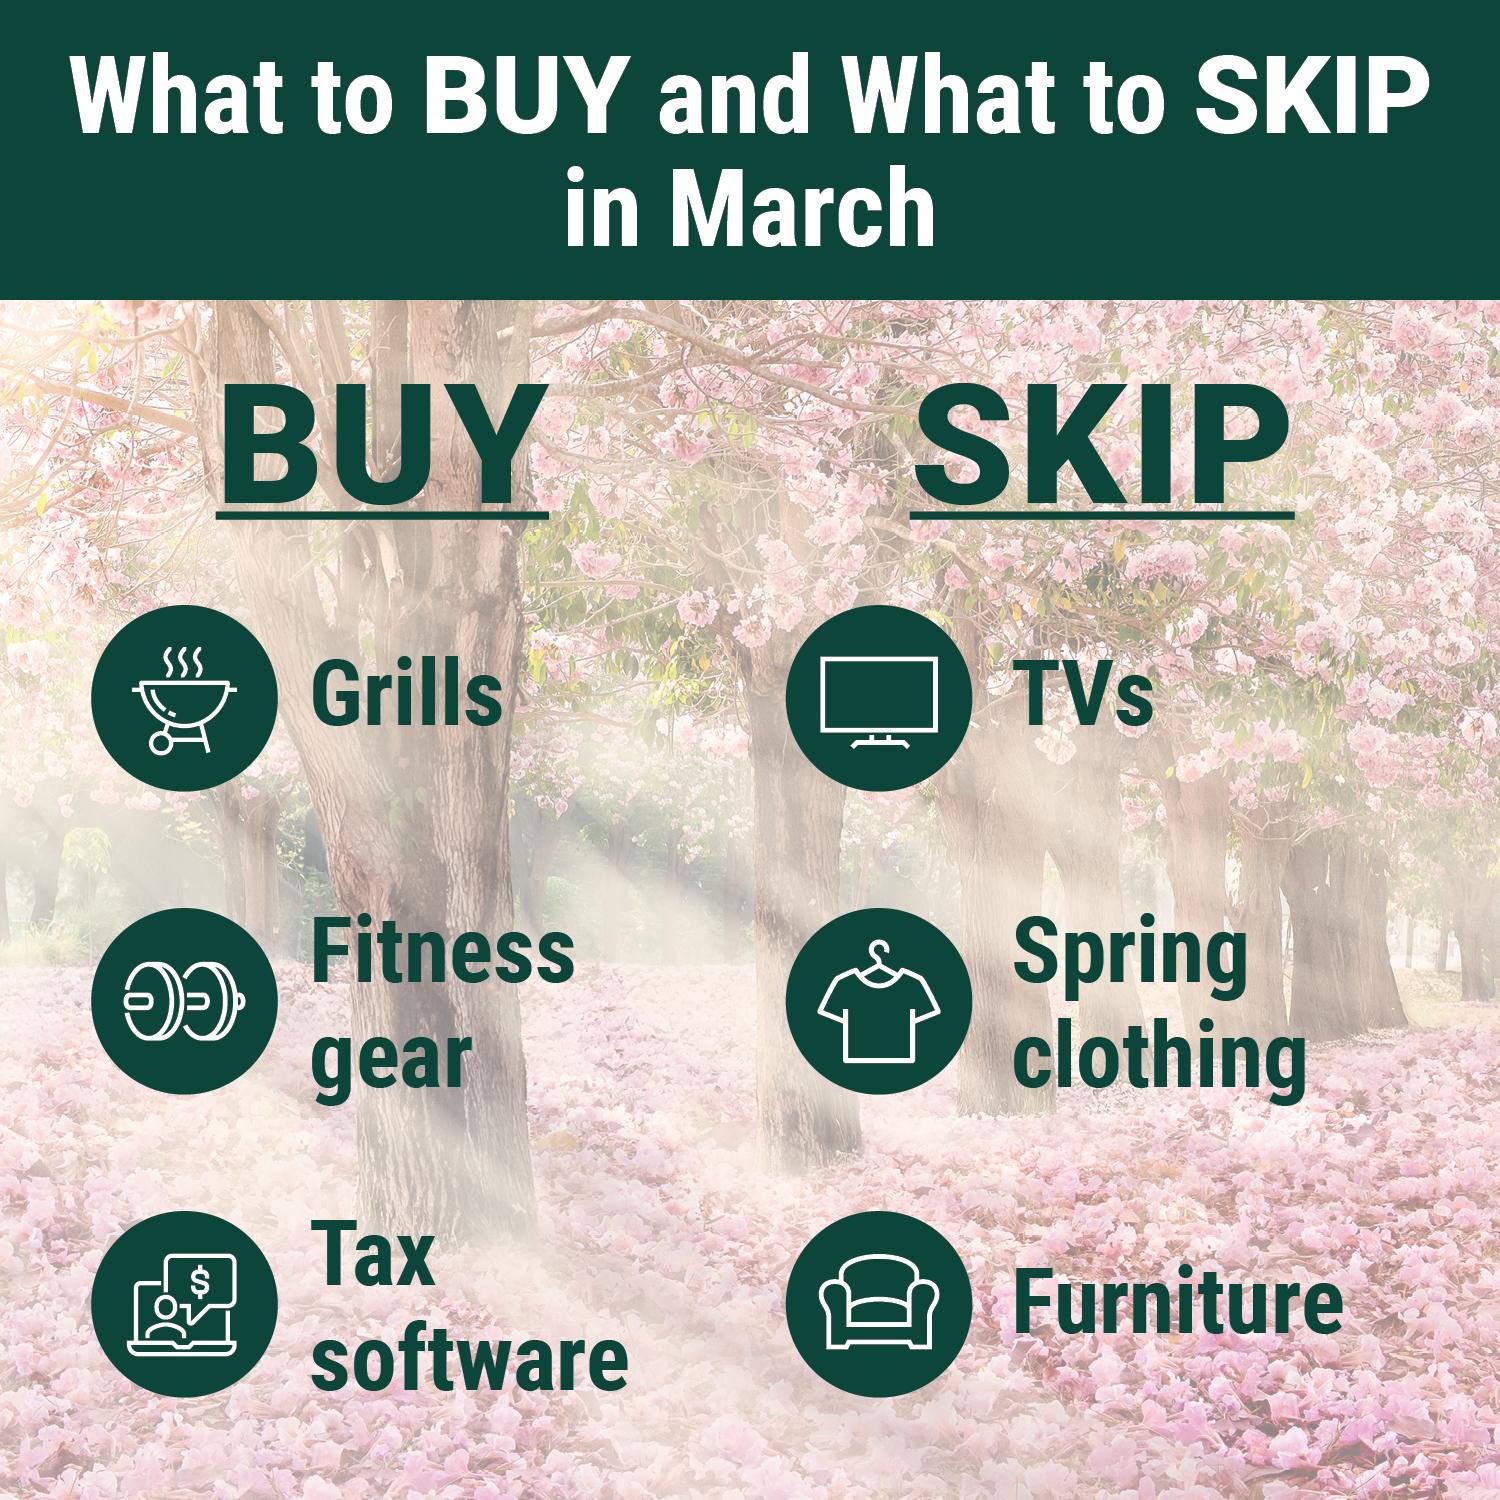 What to buy and what to skip in March